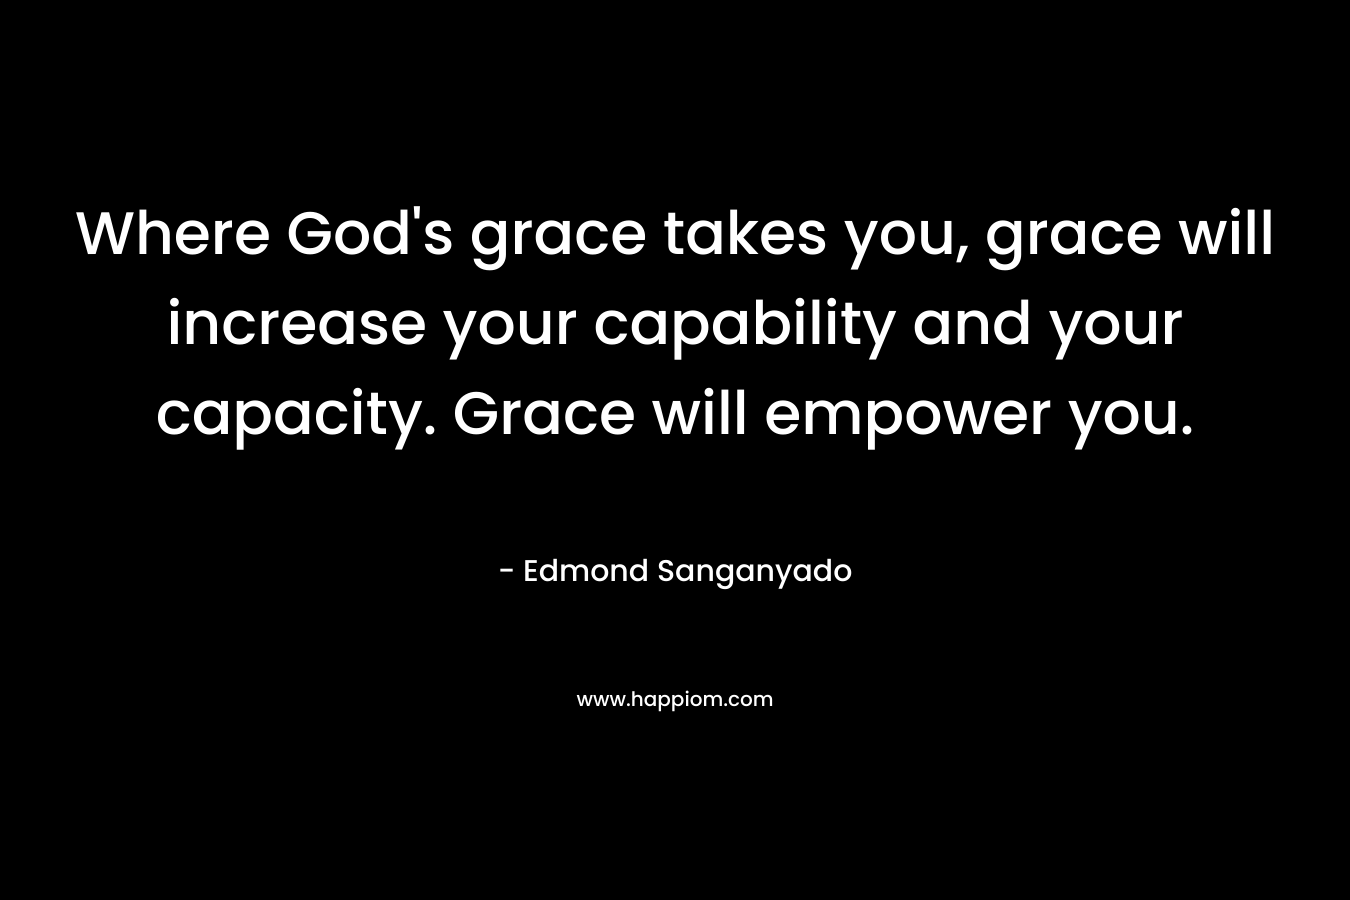 Where God’s grace takes you, grace will increase your capability and your capacity. Grace will empower you. – Edmond Sanganyado